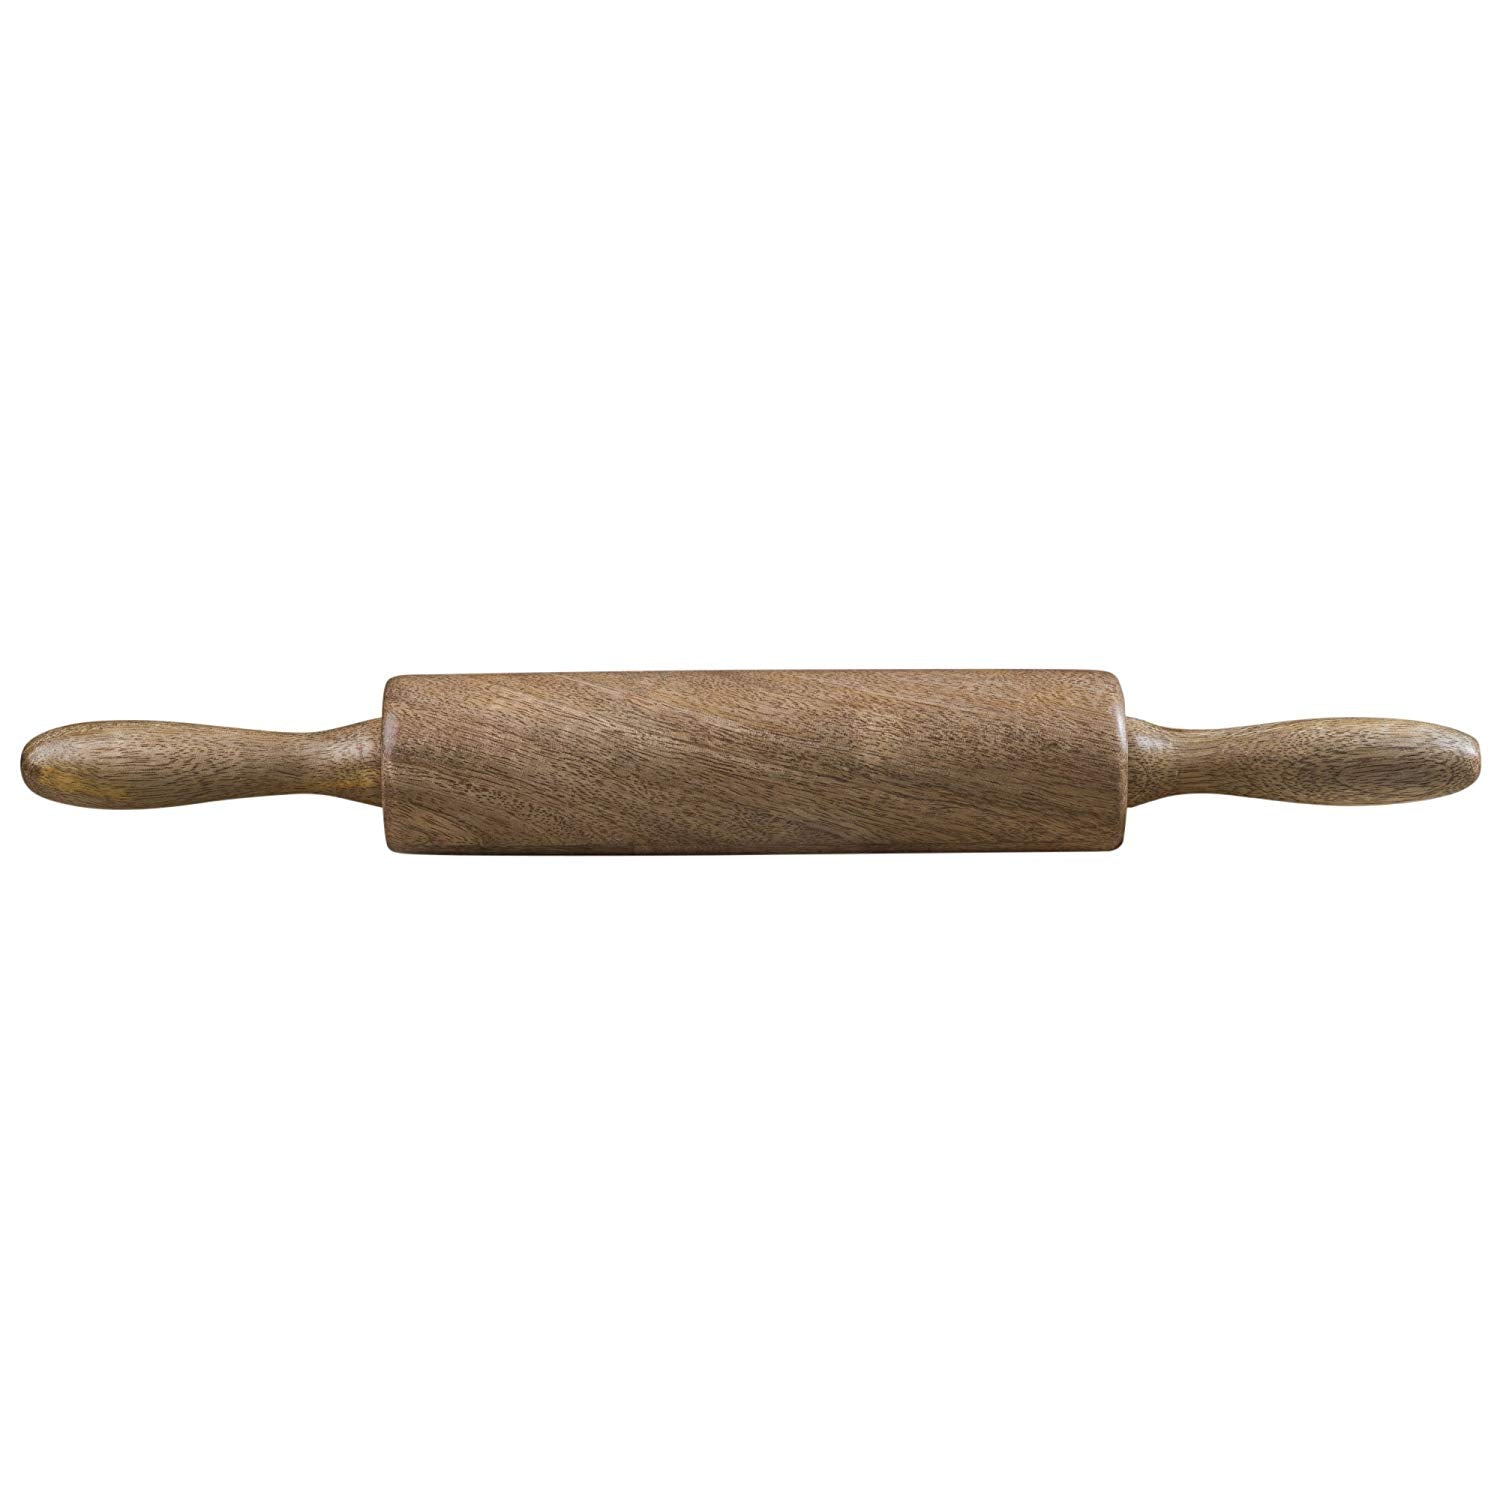 Rusticity Wood Rolling Pin Ideal for Baking Needs - Used by Bakers & Cooks for Pasta, Cookie Dough, Pastry, Bakery, Pizza, Fondant, Chapati | Acacia Wood | Handmade | (18 X2 in)